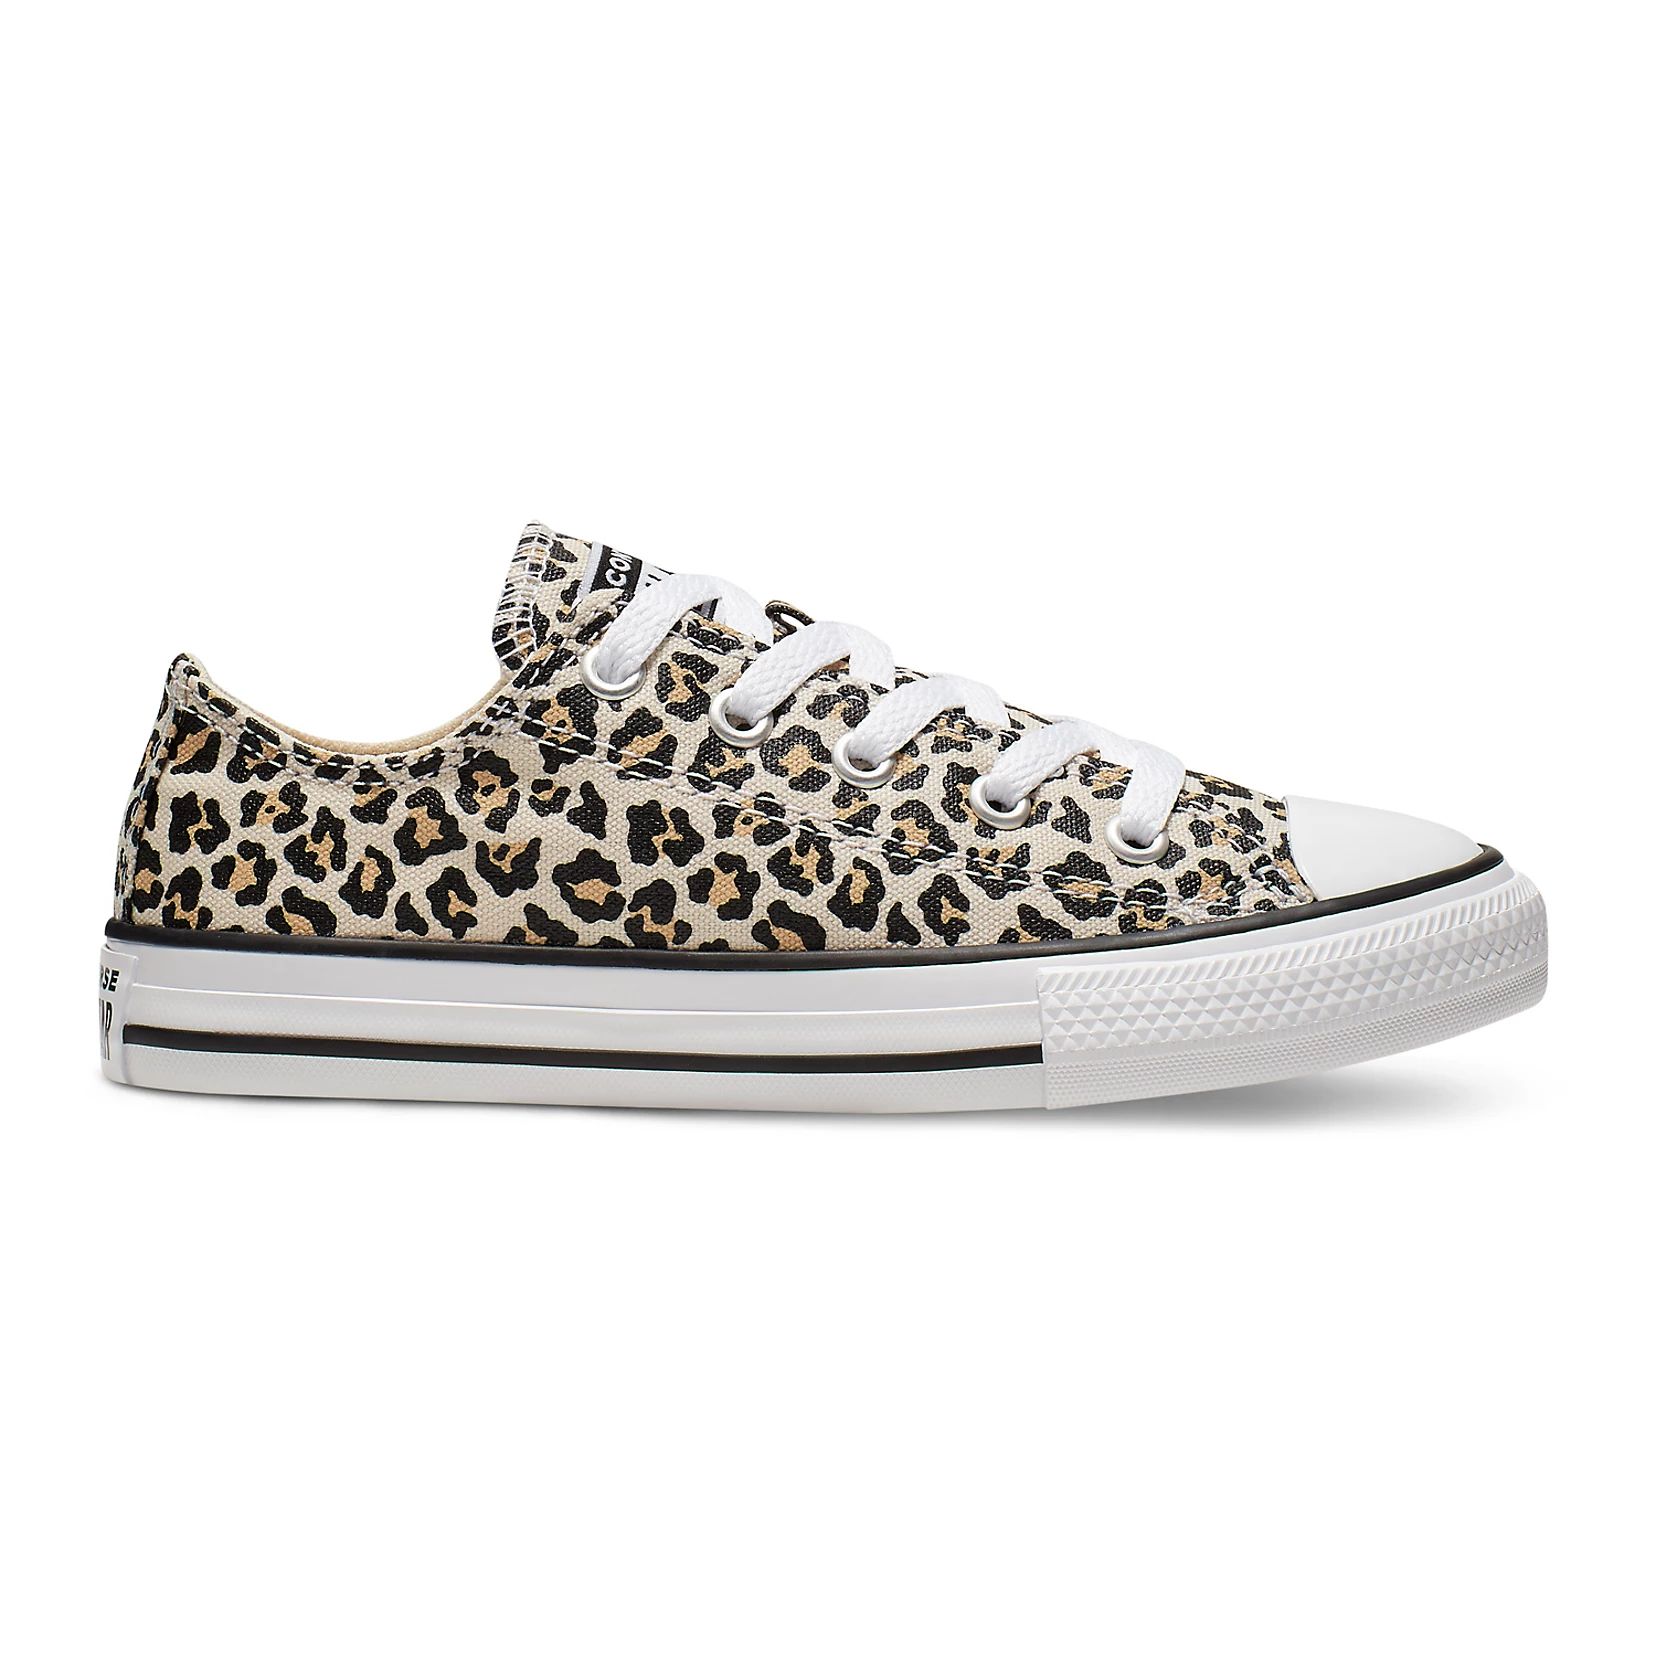 Girls' Converse Chuck Taylor All Star Leopard Sneakers | Kohl's